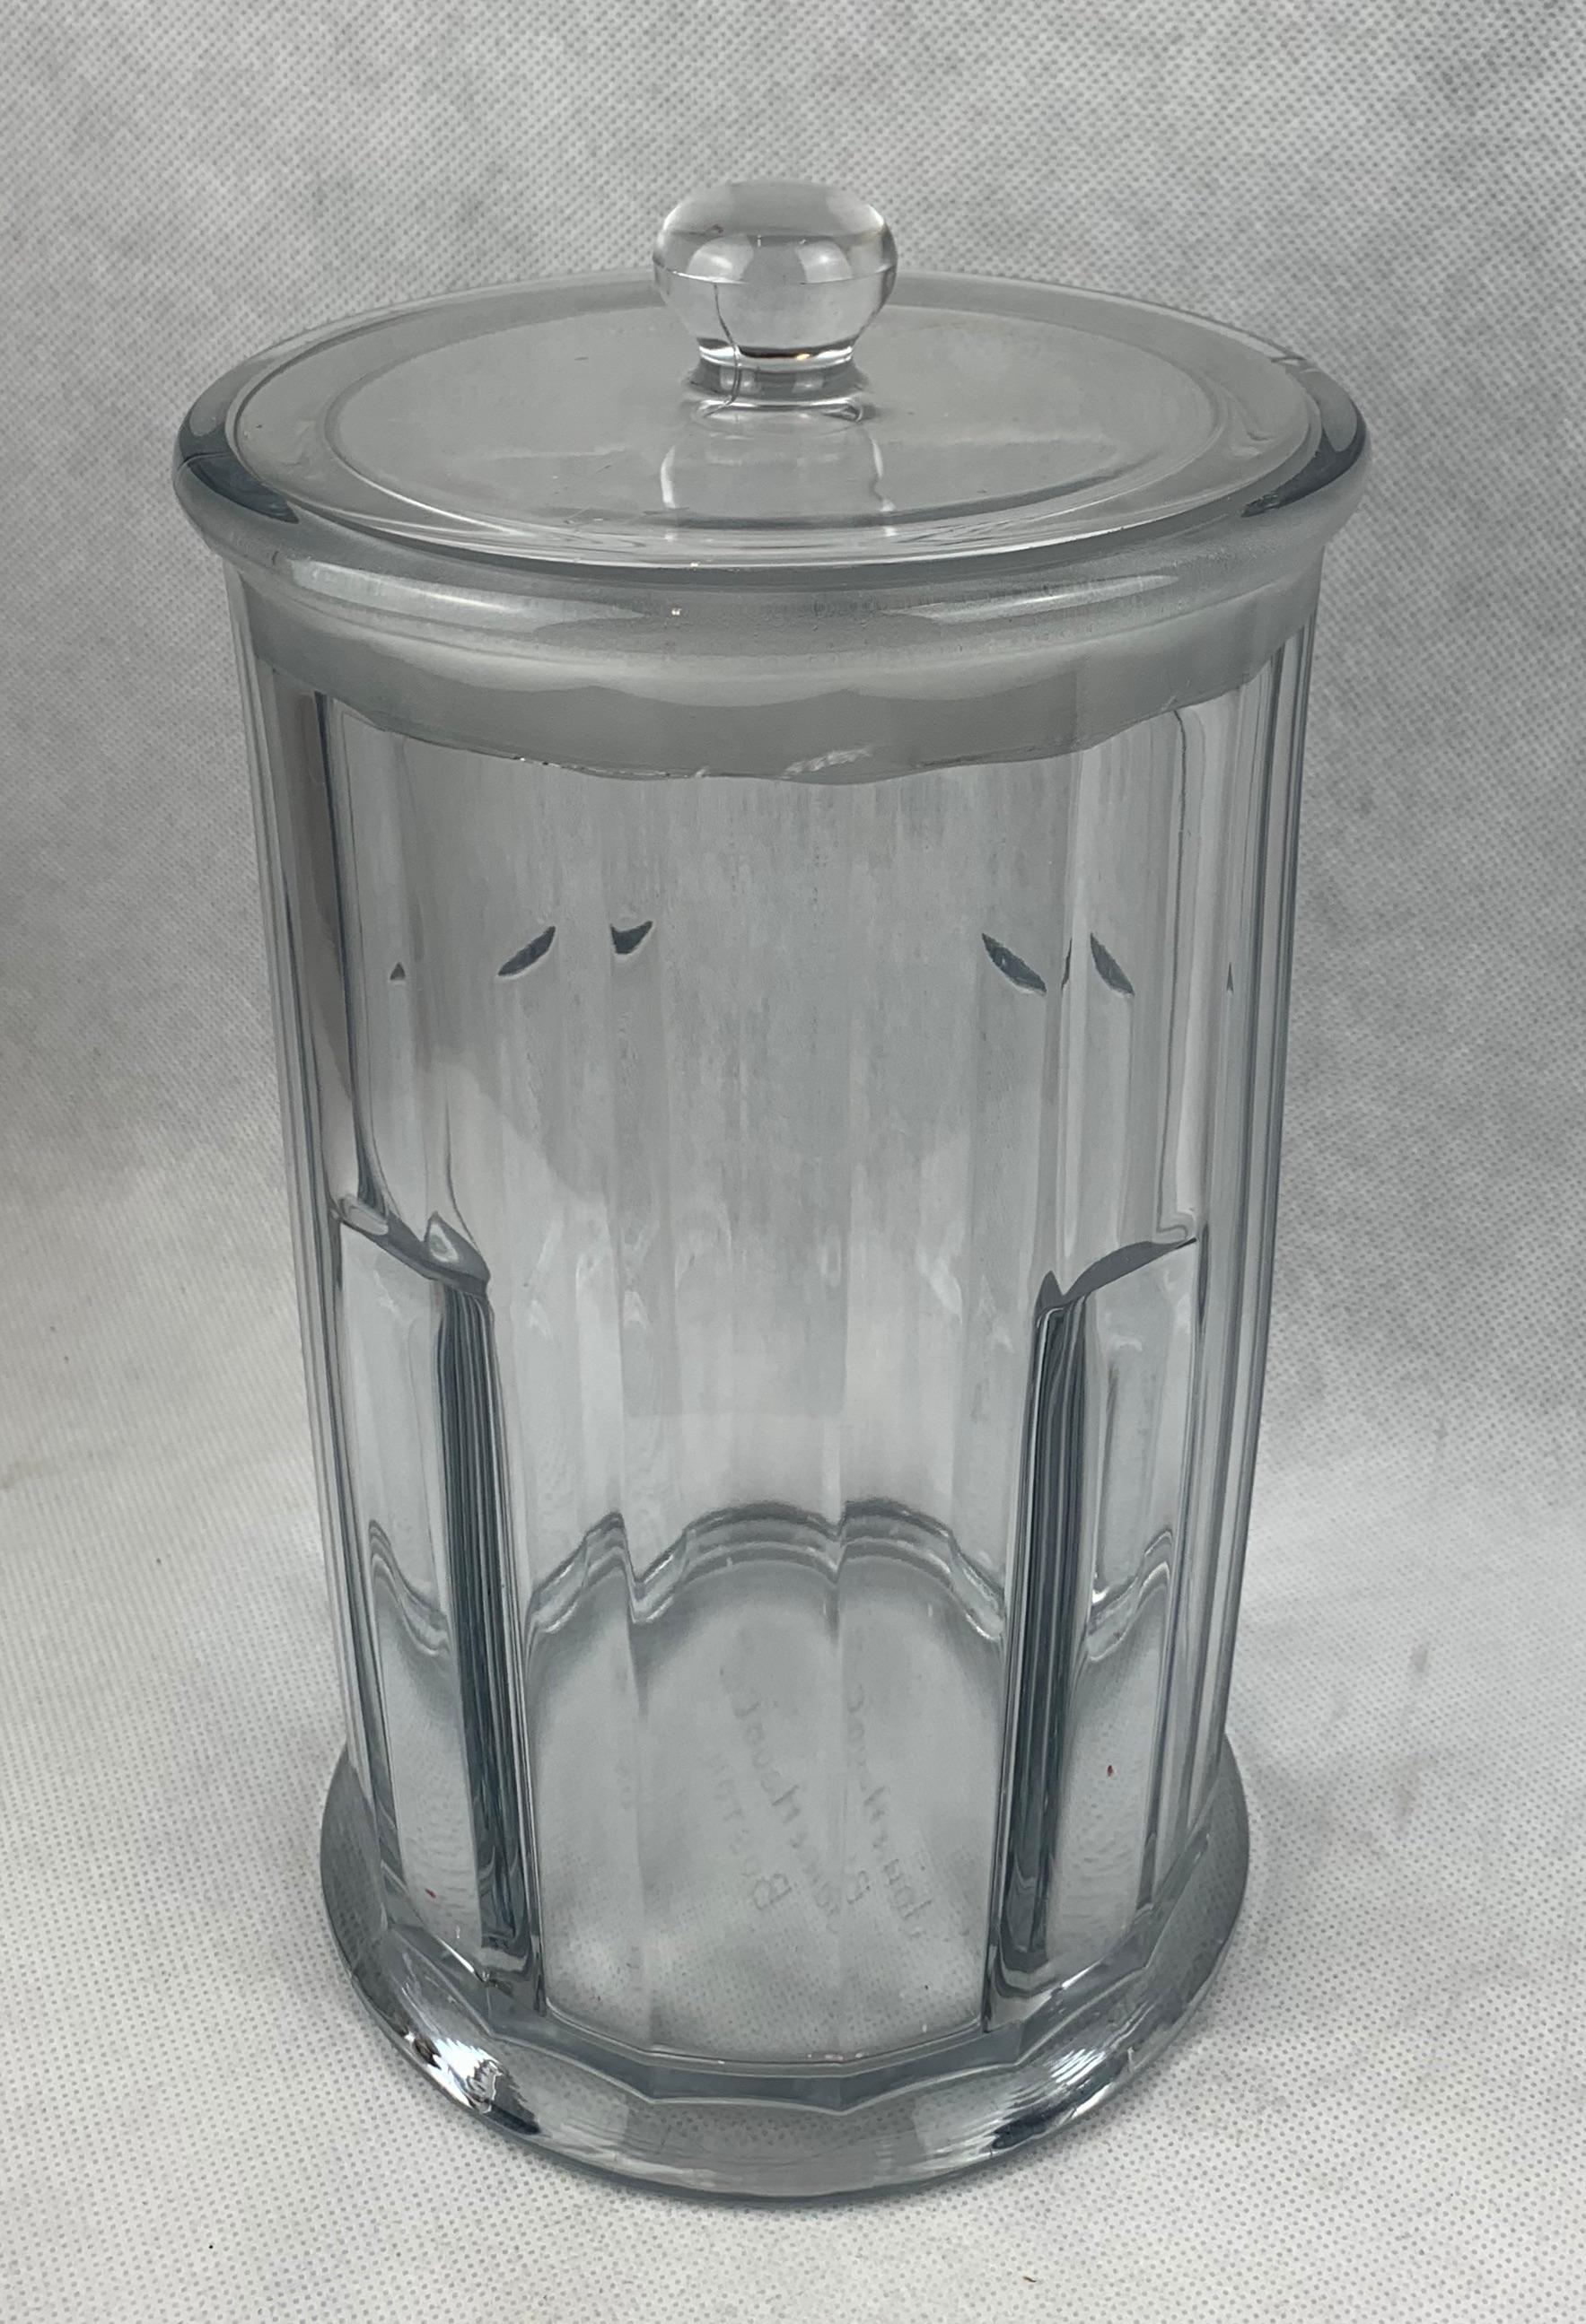 Heisey Glass created this glass apothecary jar with cover for John Hood Co., Boston early in the twentieth century. This thick glass piece has twelve faceted panels and a ground glass stopper. The stopper has some chips due to the nature of its use.